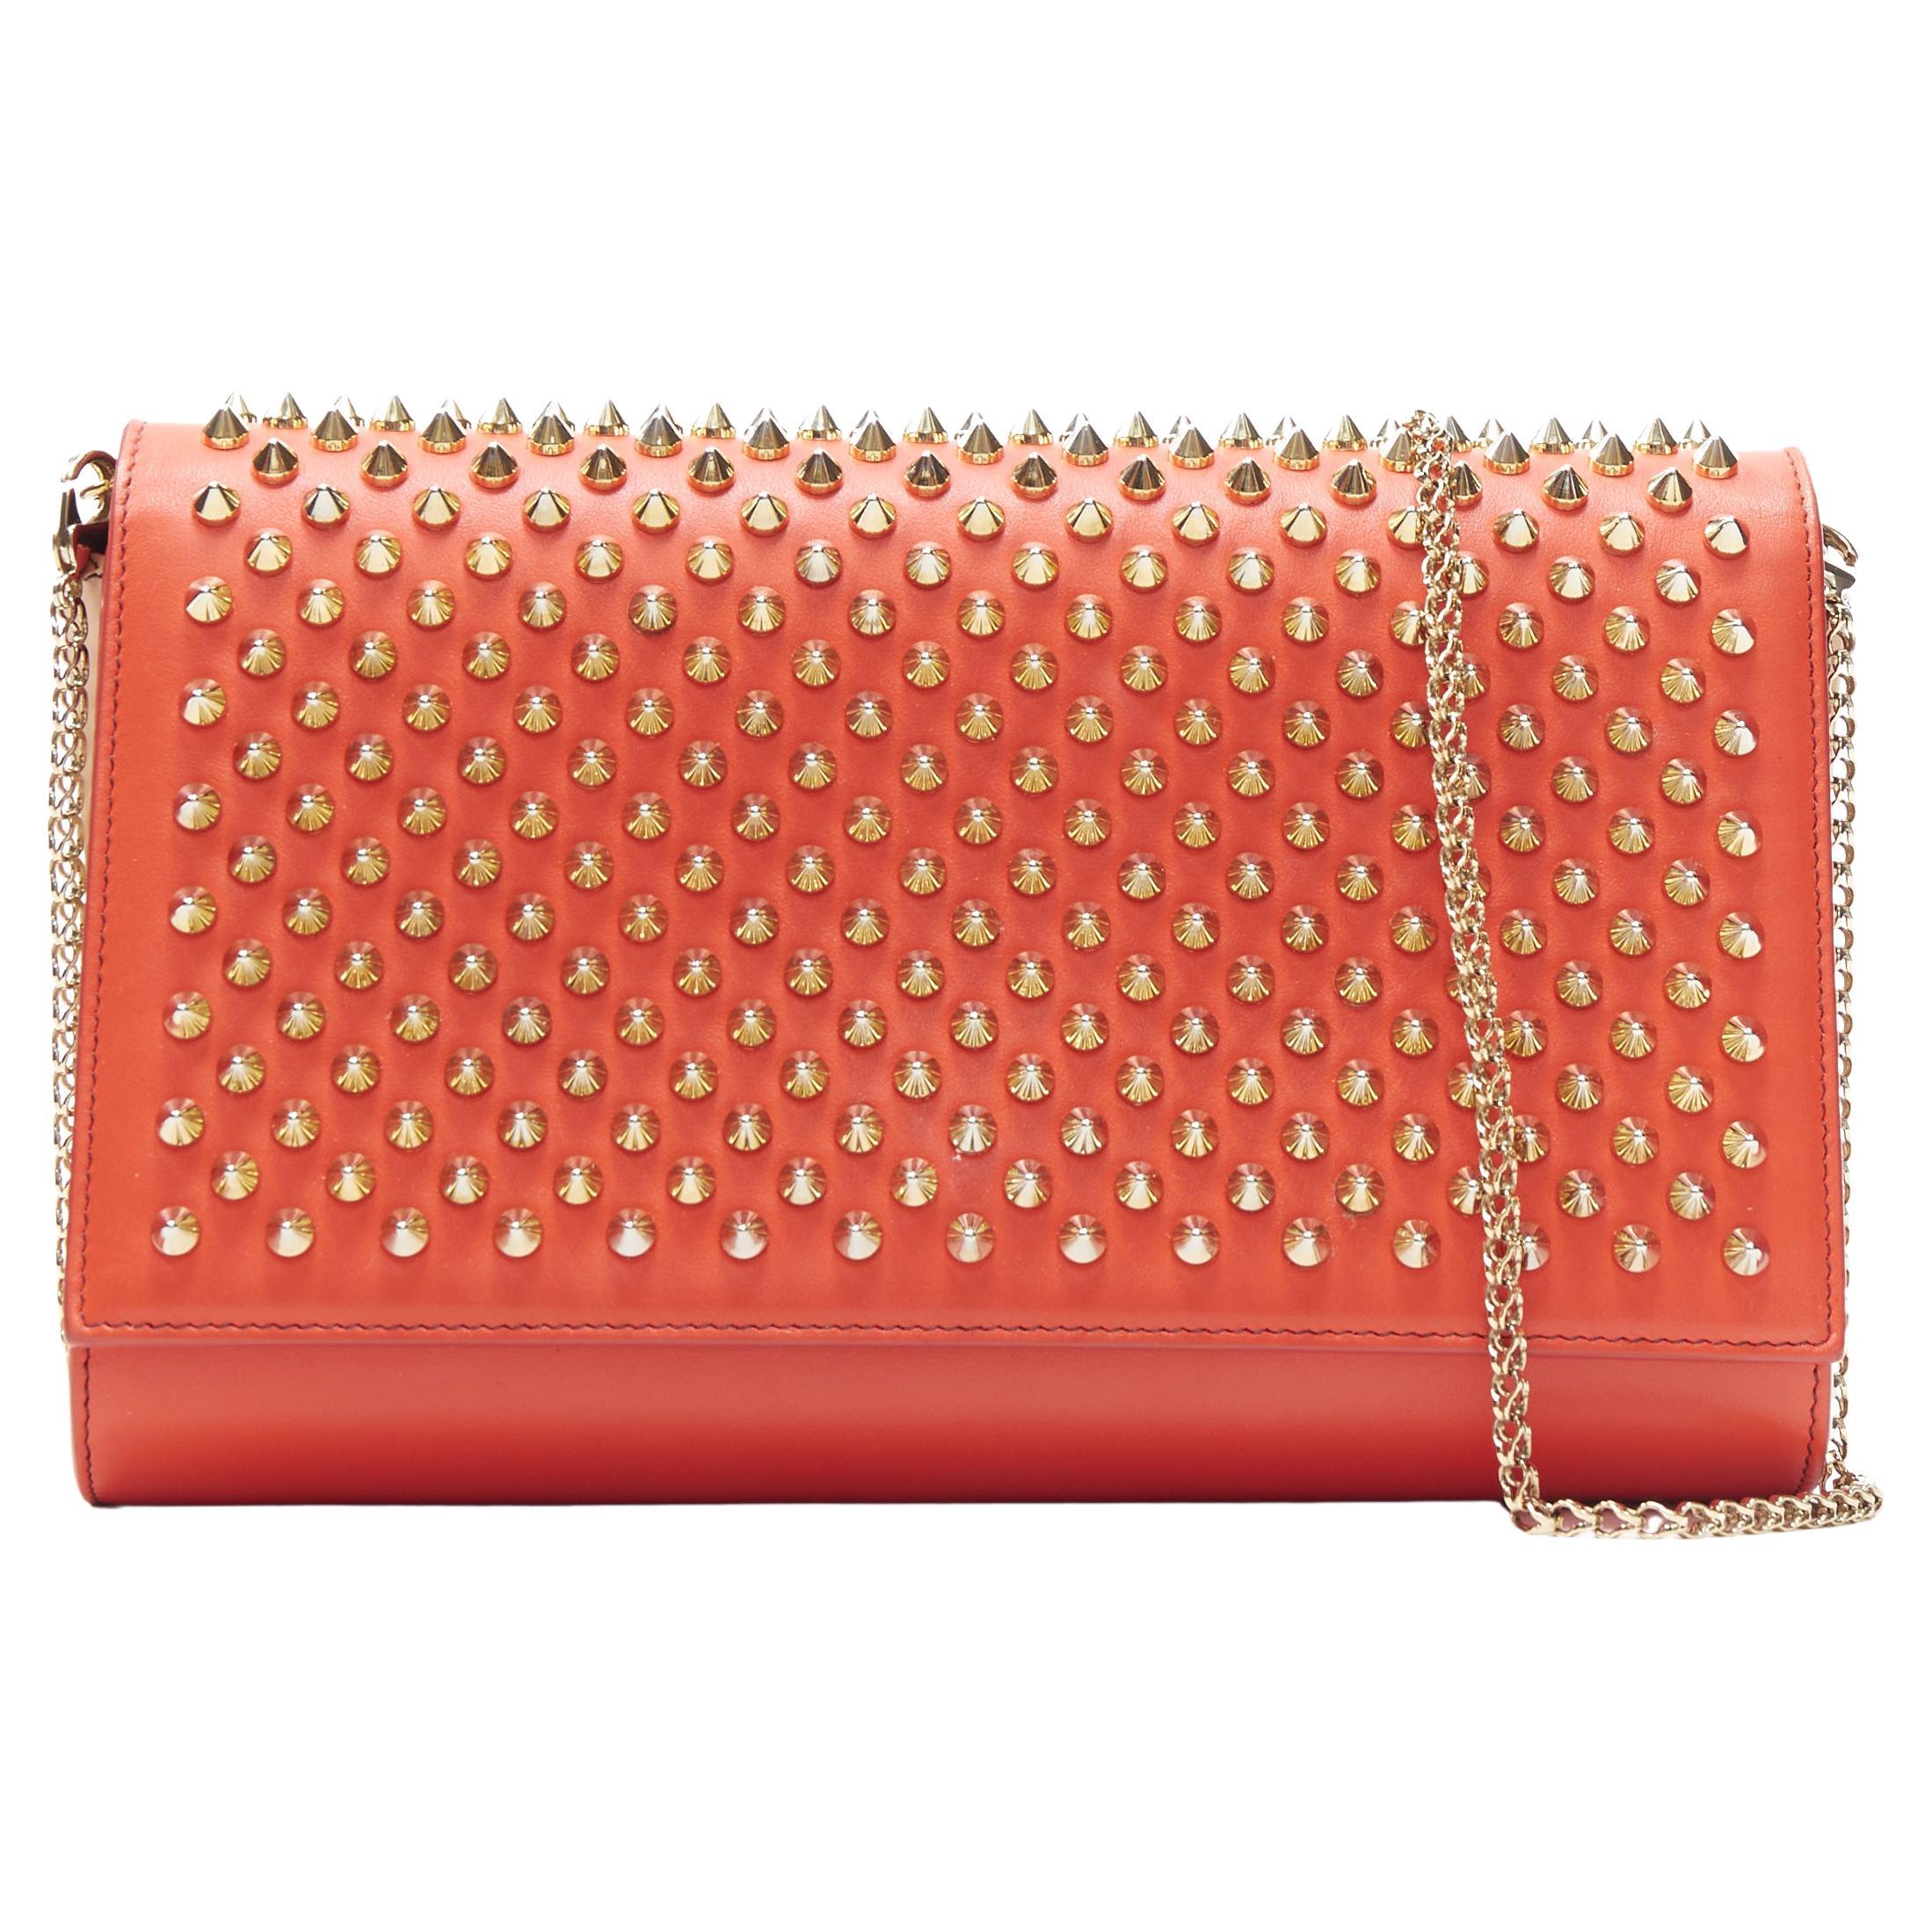 CHRISTIAN LOUBOUTIN Paloma red gold spike stud pink gusset shoulder chain bag